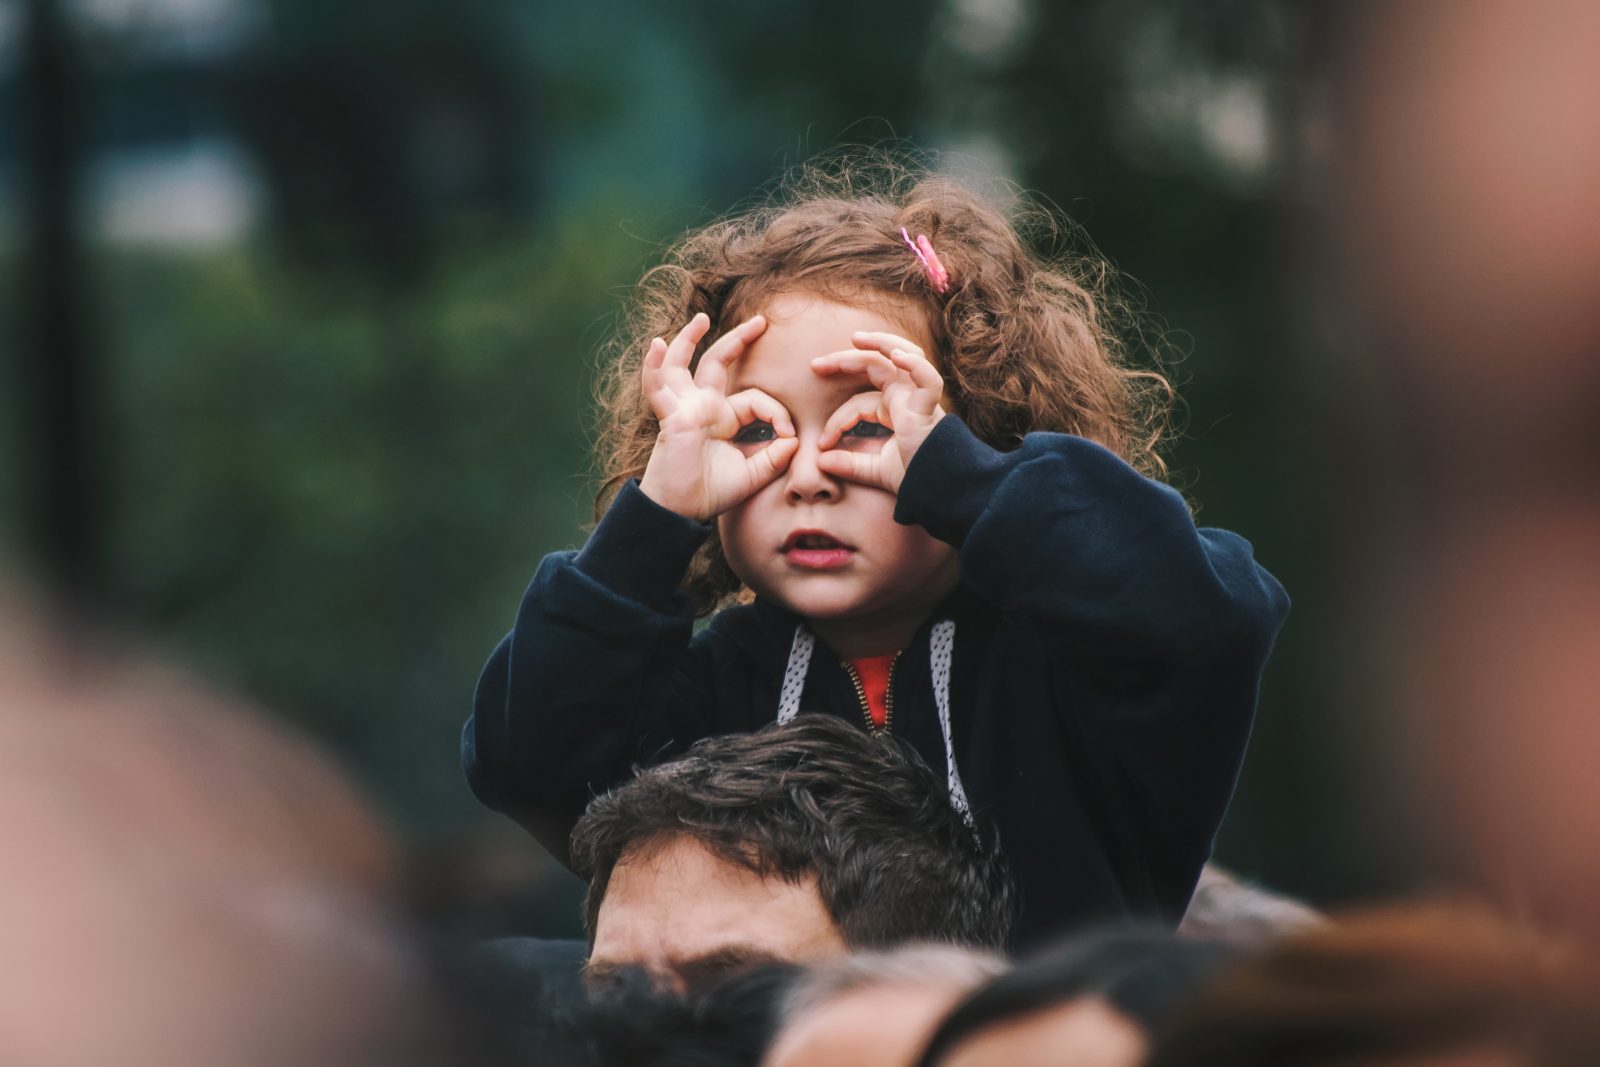 A photo of a small girl using her fingers as glasses, sat on a male relative's shoulders. Photo by Edi Libedinsky on Unsplash